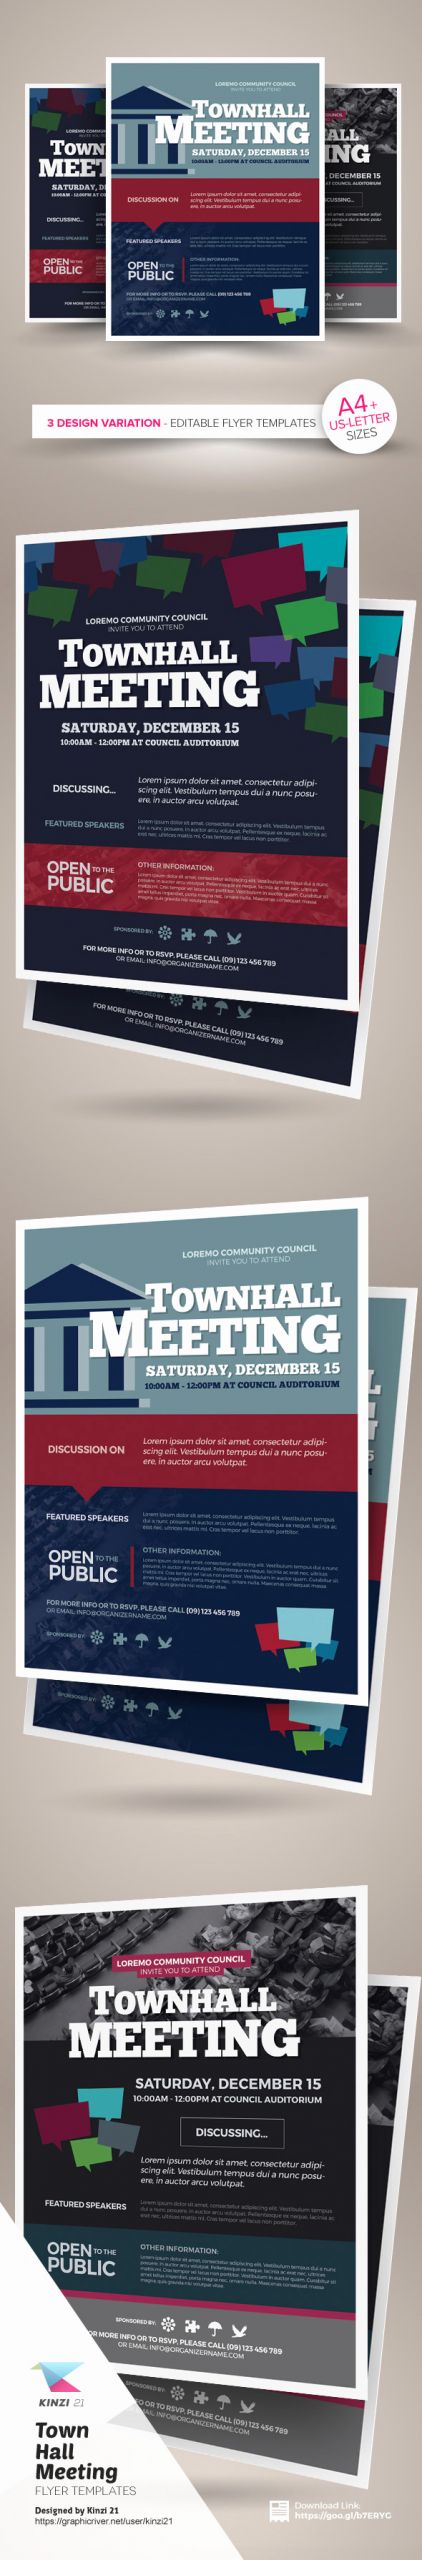 Town Hall Meeting Template Awesome town Hall Meeting Flyer Templates On Behance